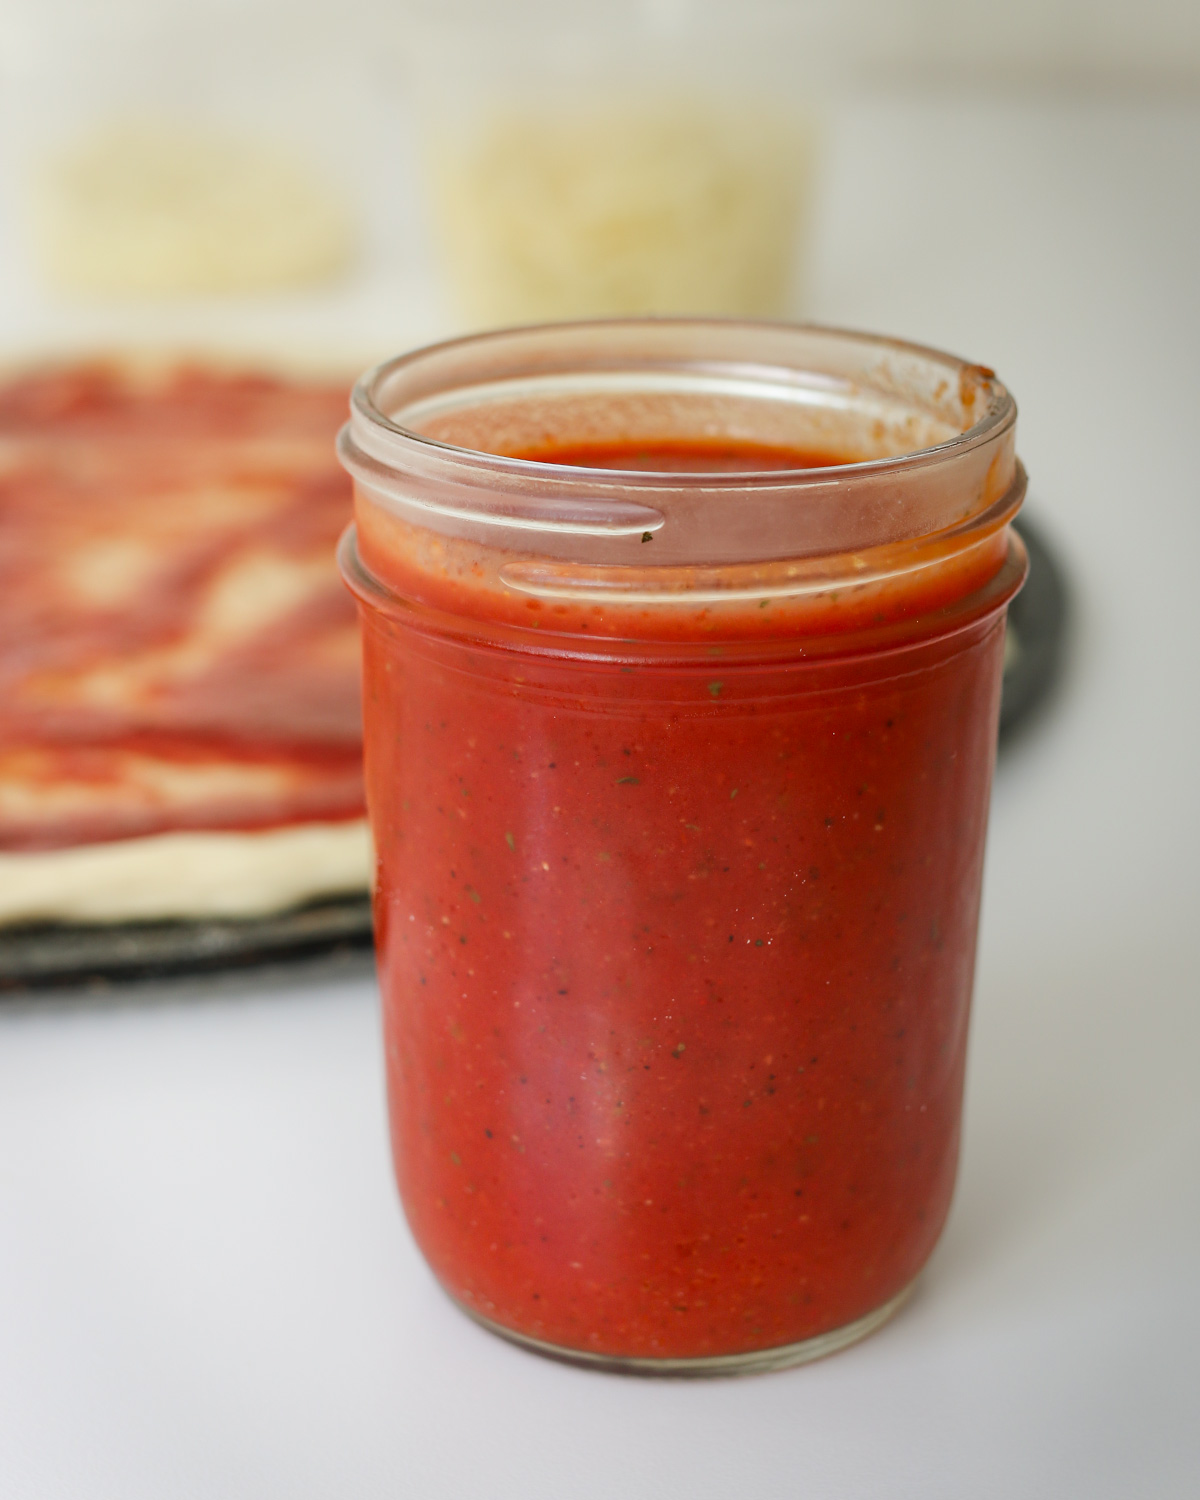 jar of pizza sauce made with tomato paste on table next to pizza and container of cheese.